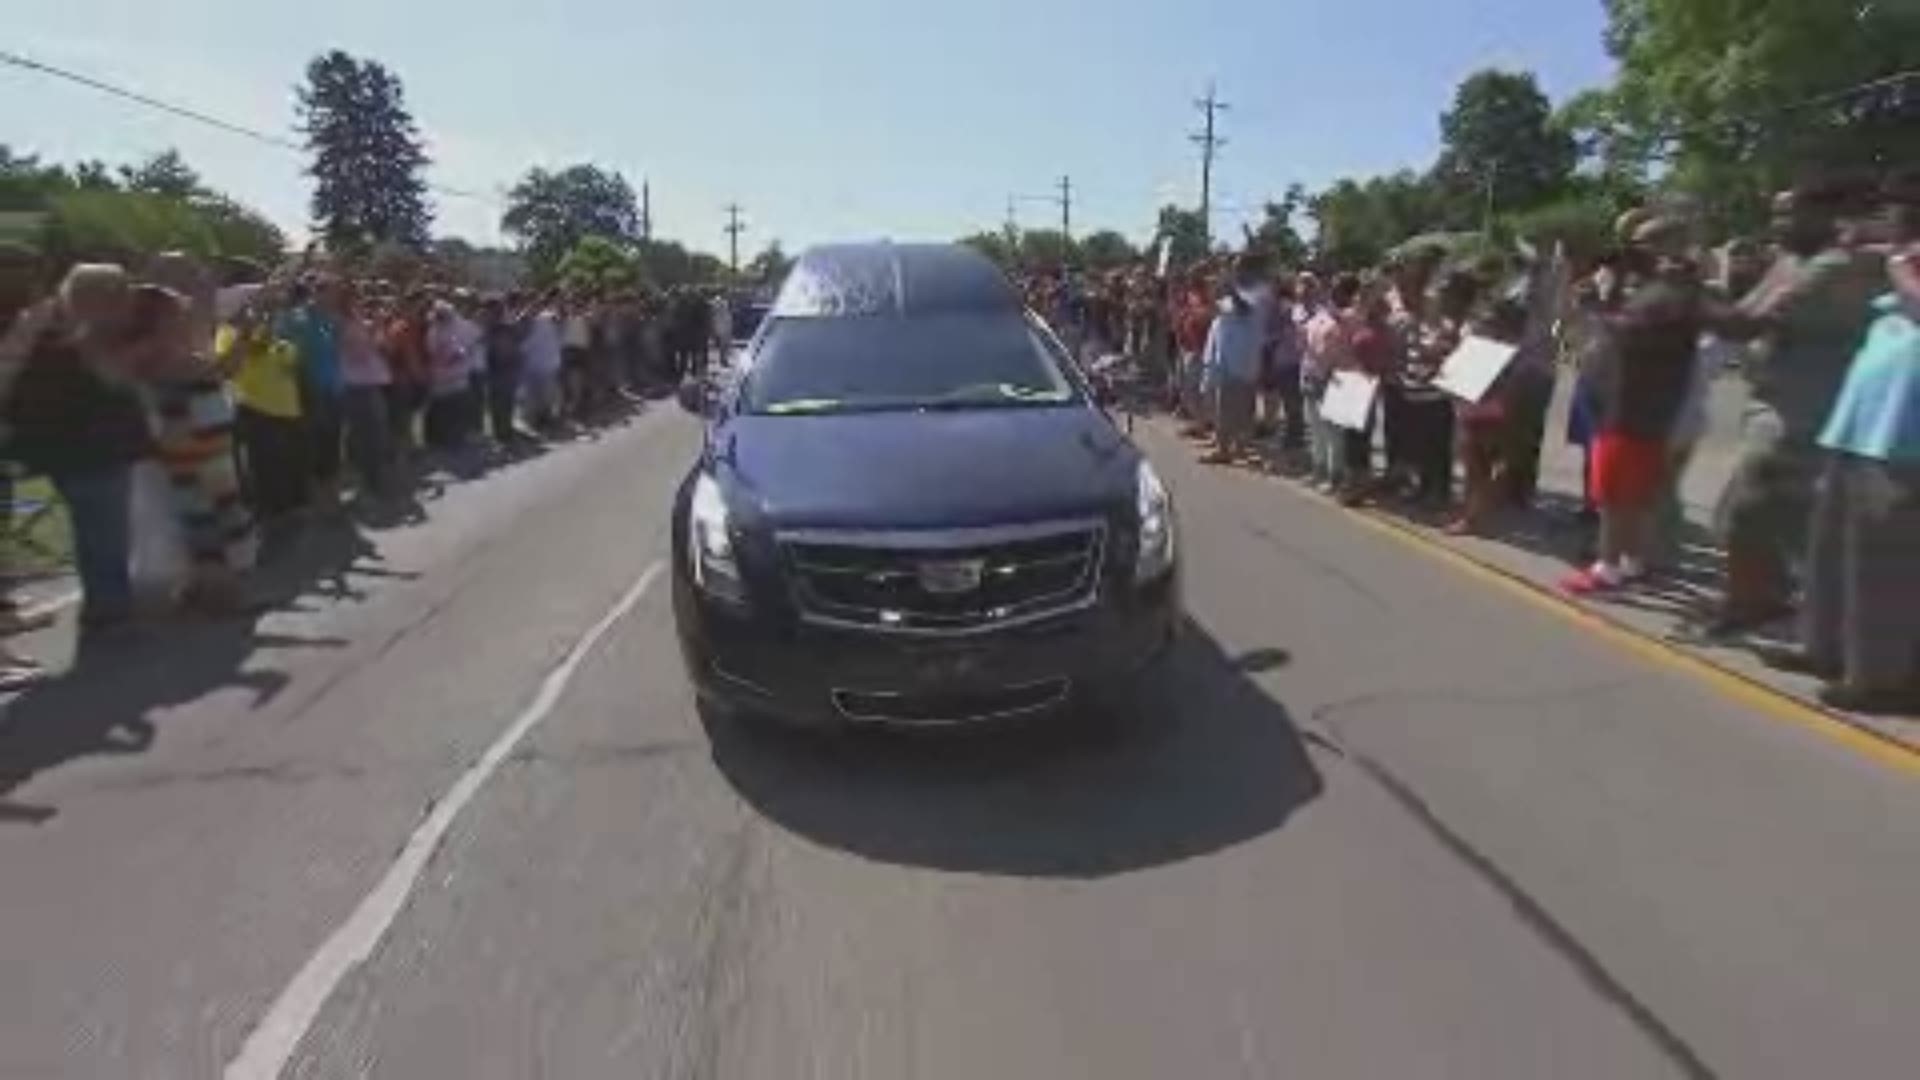 The people waiting outside the funeral home in Louisville chanted for Muhammad Ali as the procession got underway.